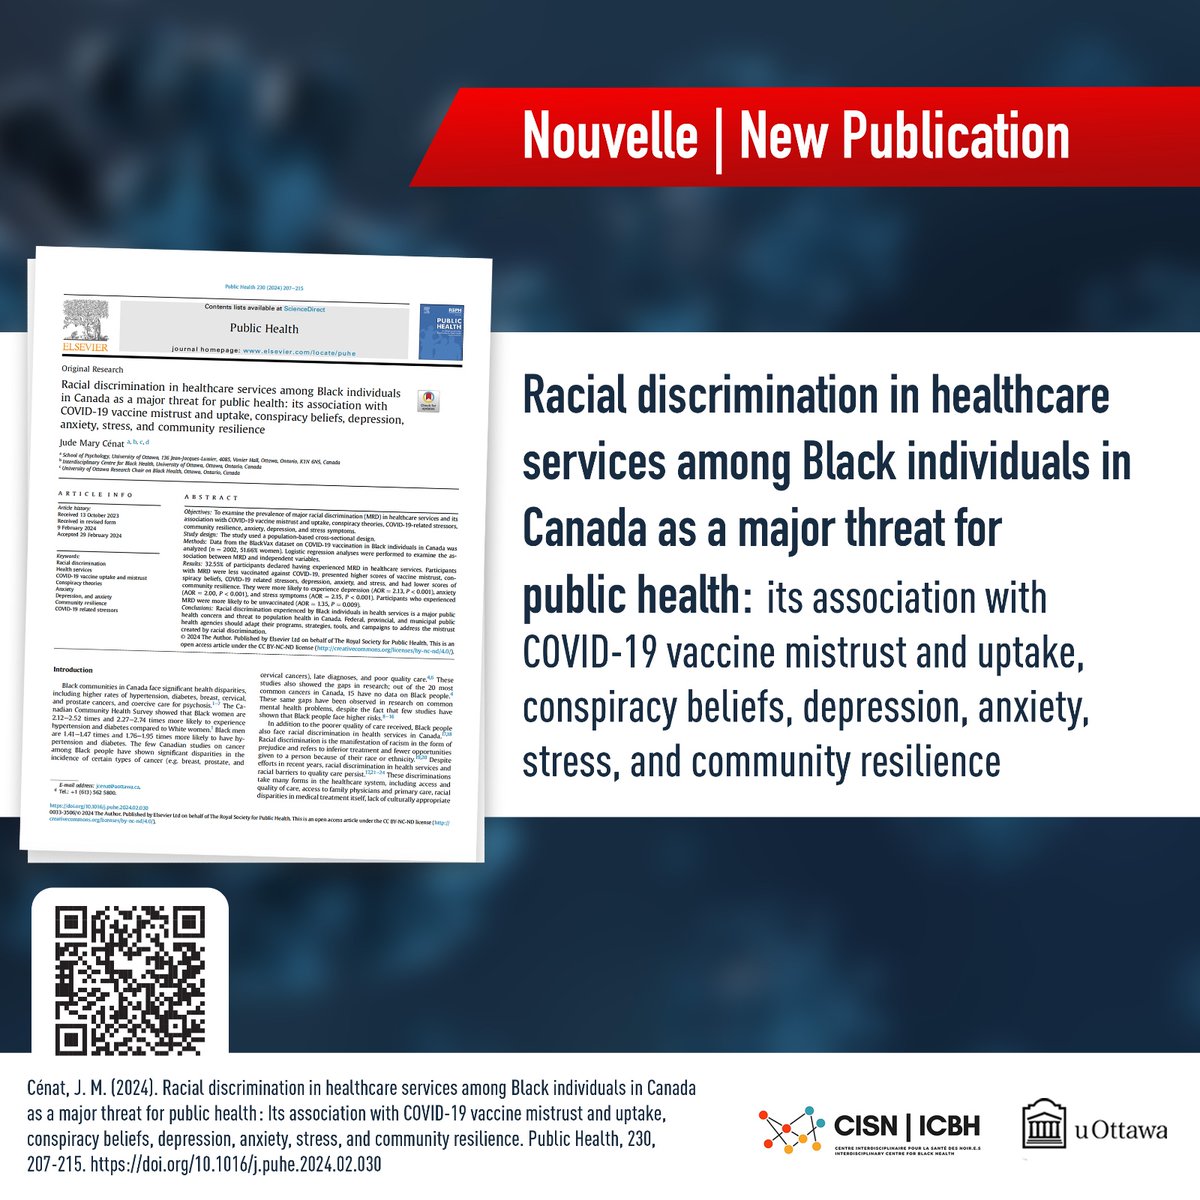 New publication from our director, @DrJMCenat in @RSPH_PUHE. Unfortunately, one out of three Black people are still experiencing major racial discrimination in health settings in Canada. This racism has a harmful impact on Black people in Canada. doi.org/10.1016/j.puhe…